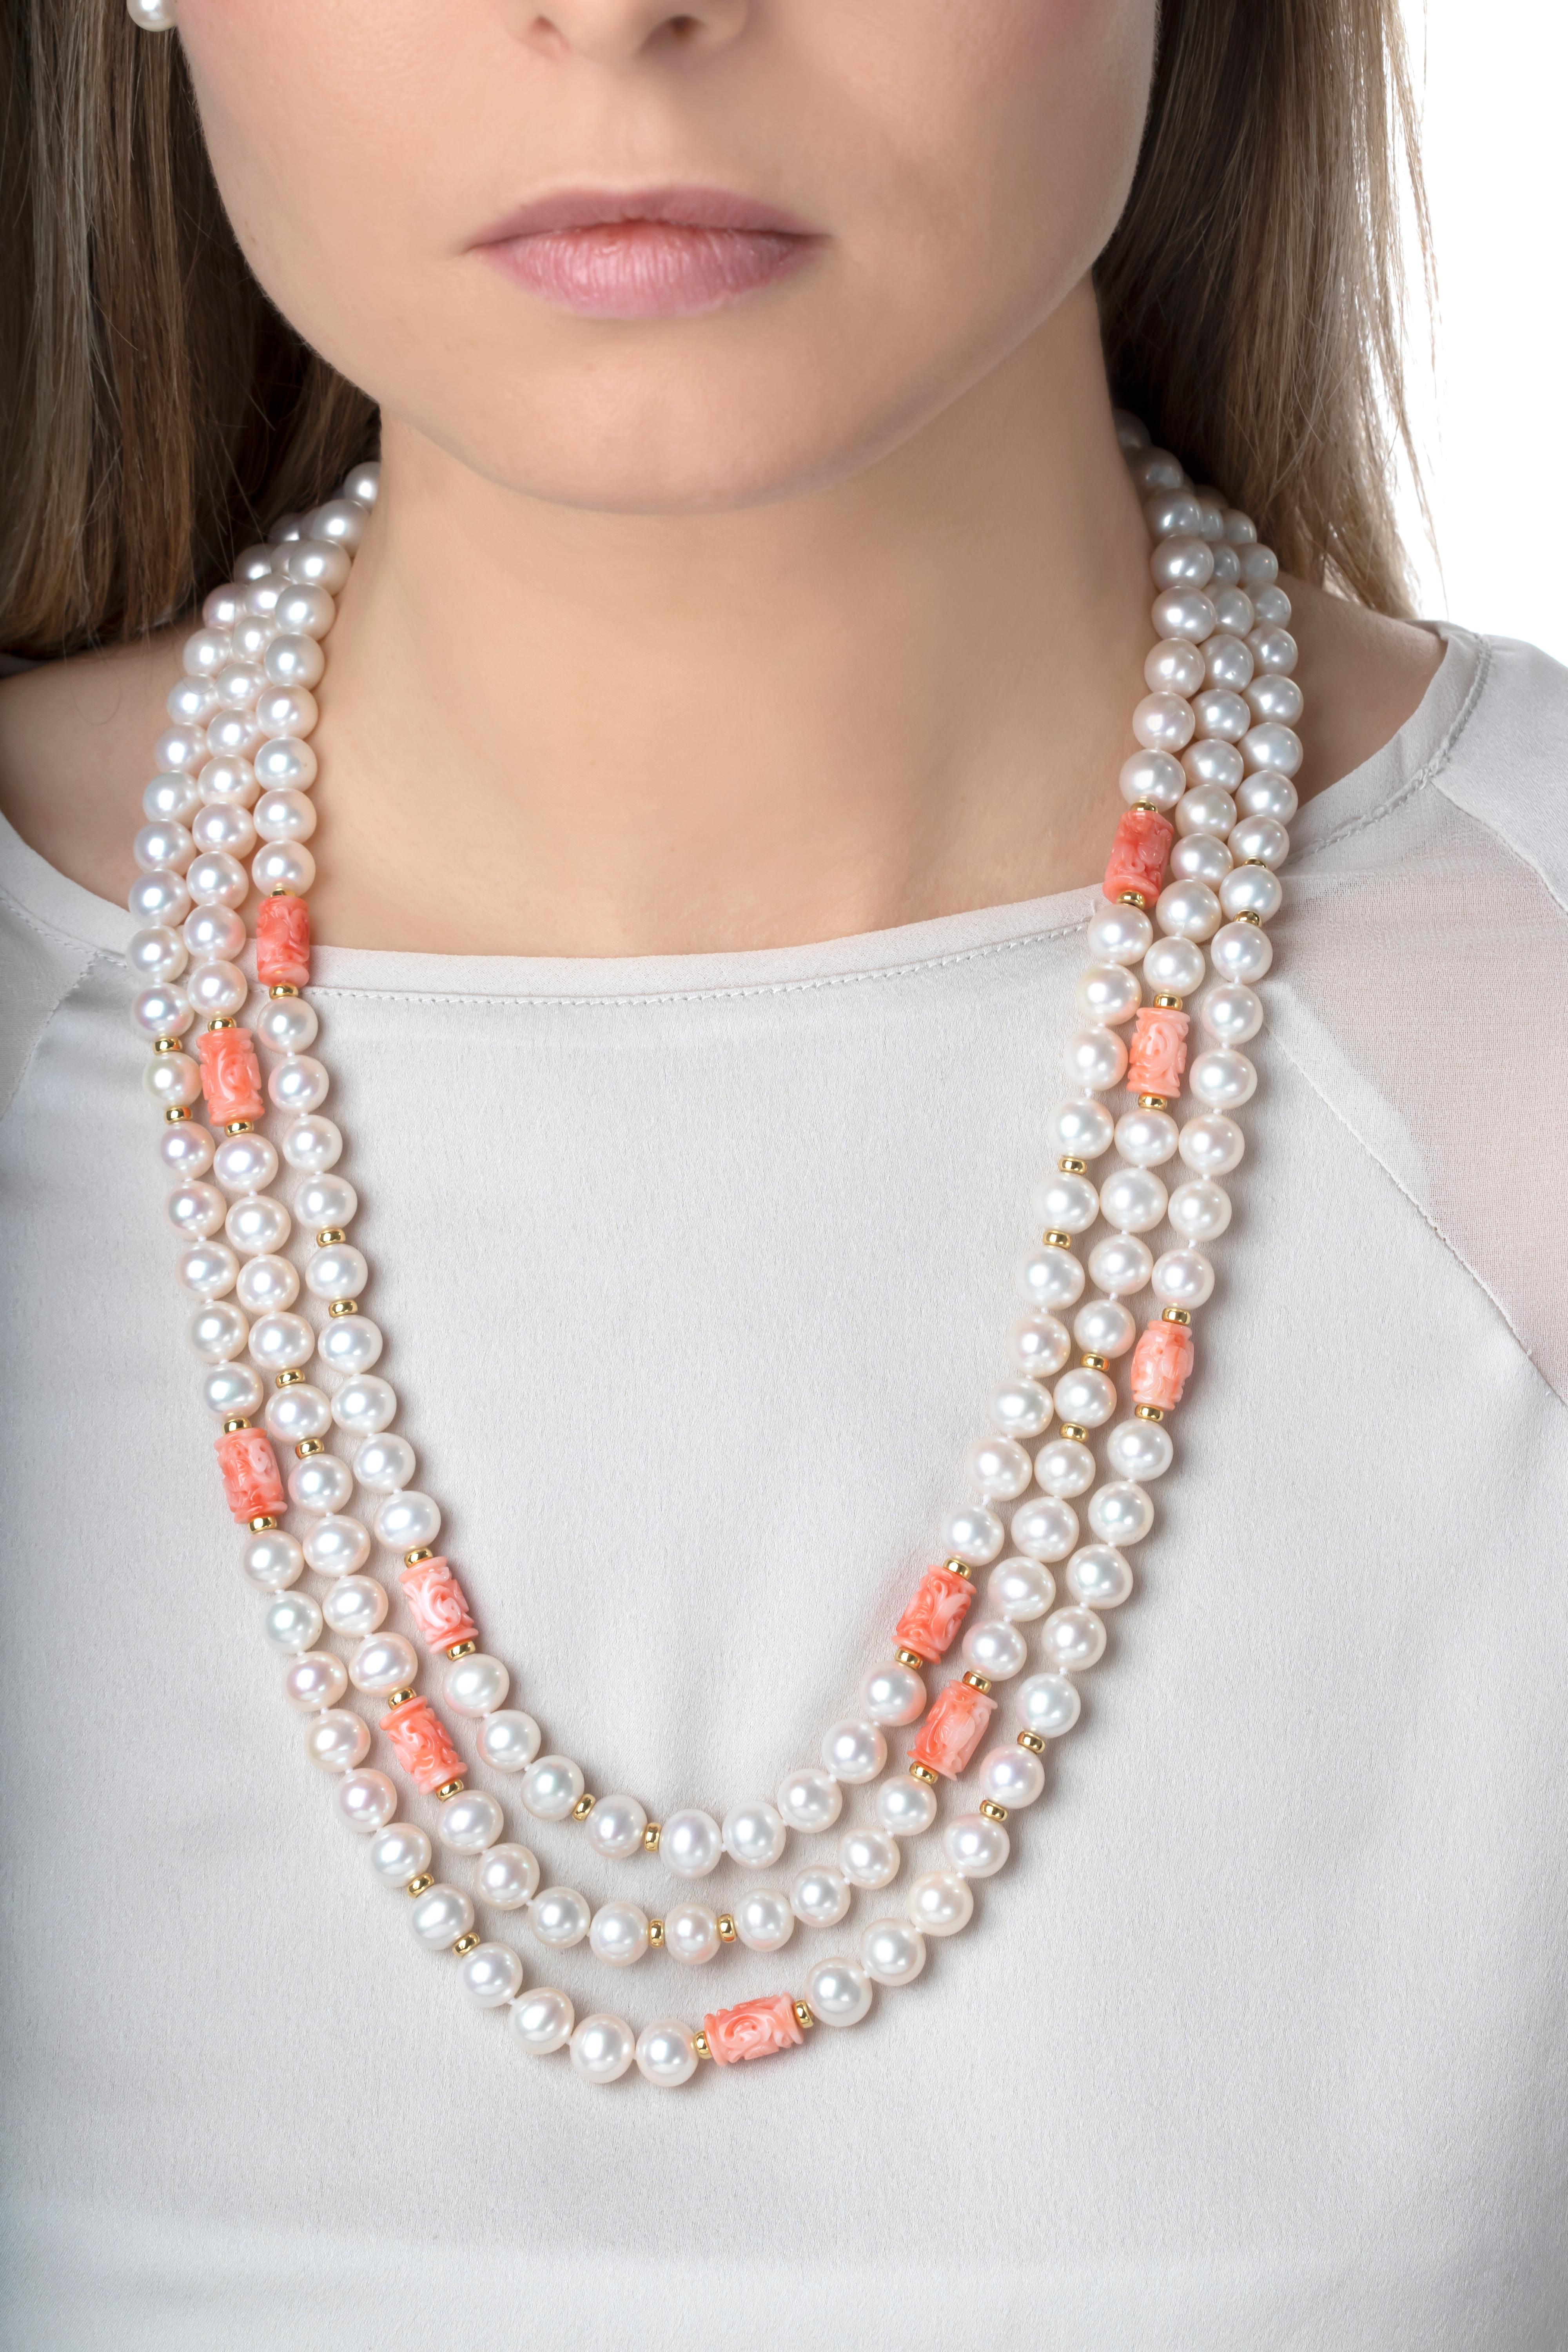 This 18K yellow gold necklace by Yoko London features three rows of expertly matched Freshwater pearls, which are perfectly enriched by the pastel hues of the carved coral beads. The soft colours showcased in this unique necklace make it truly